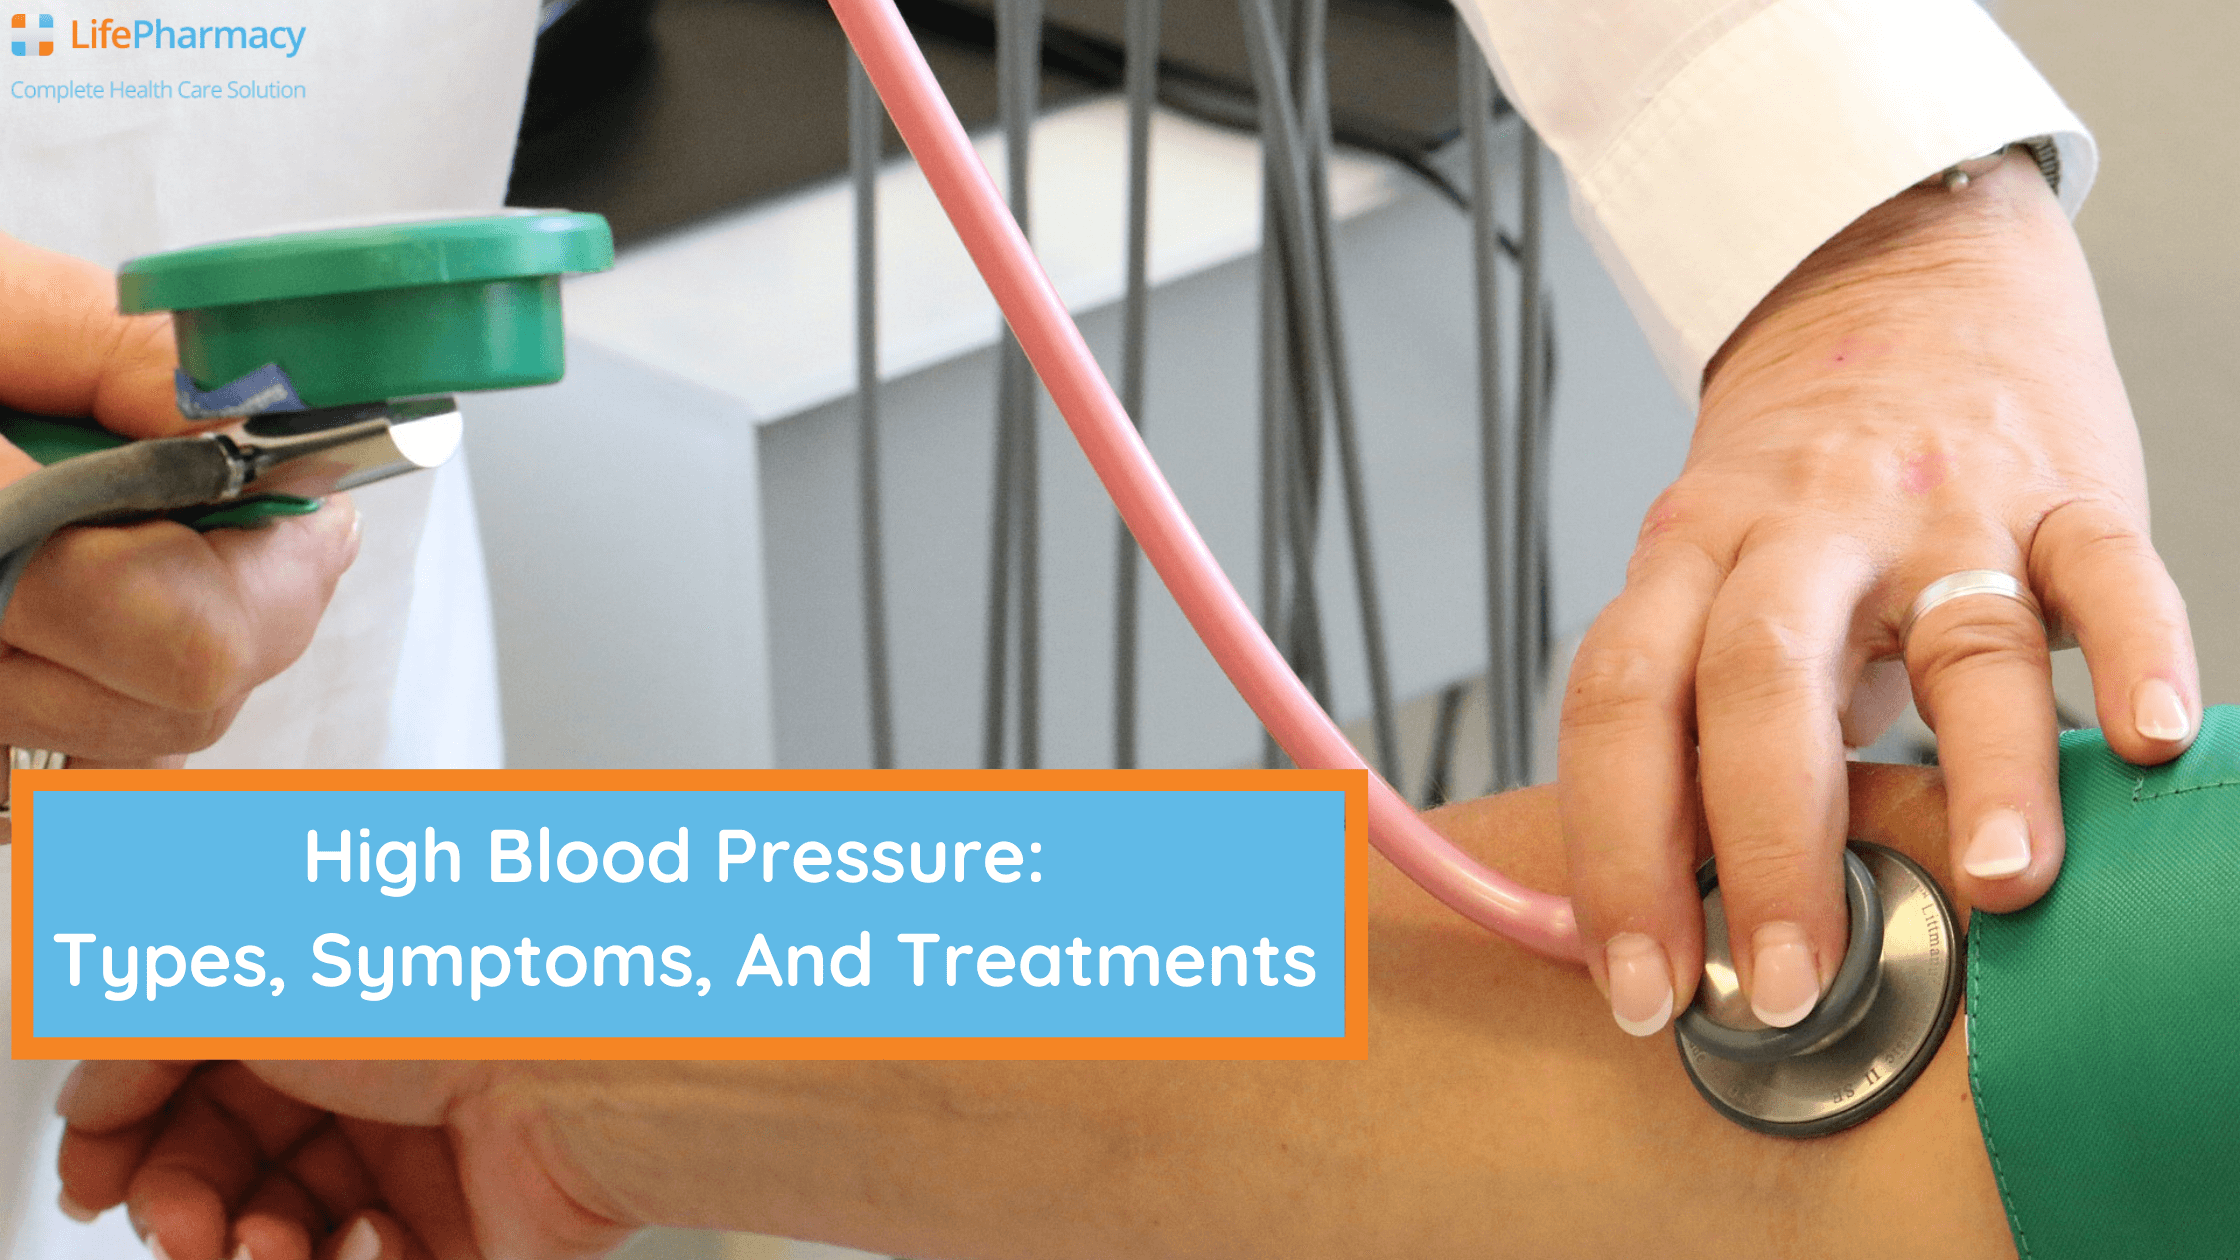 High blood pressure: types, symptoms, and treatments